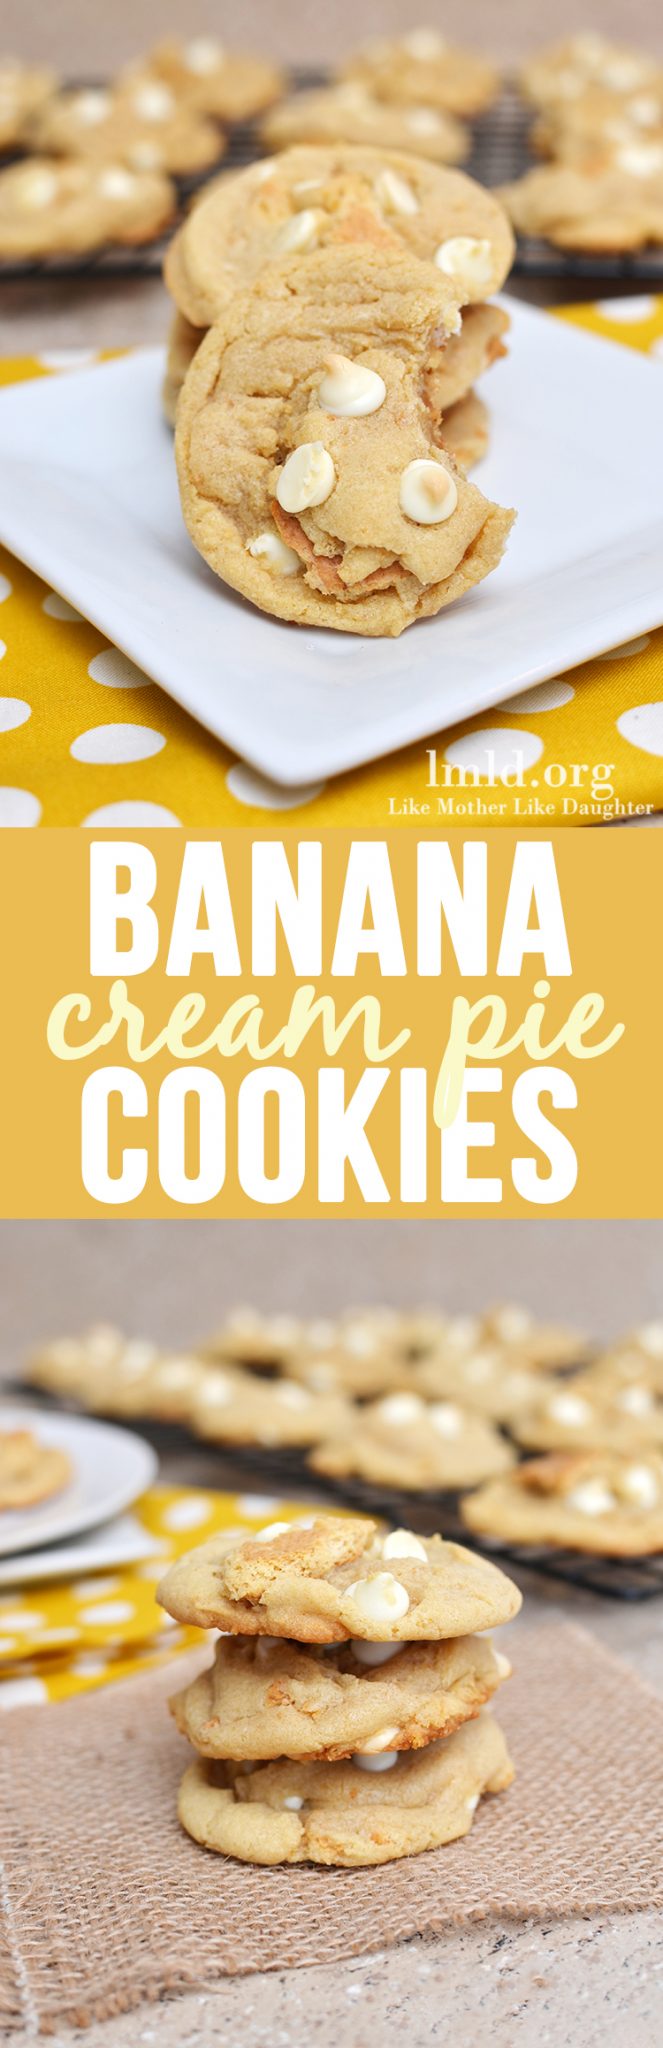 Banana Cream Pie Cookies - These amazing cookies have the same great taste of banana cream pie in a chewy and delicious cookie!